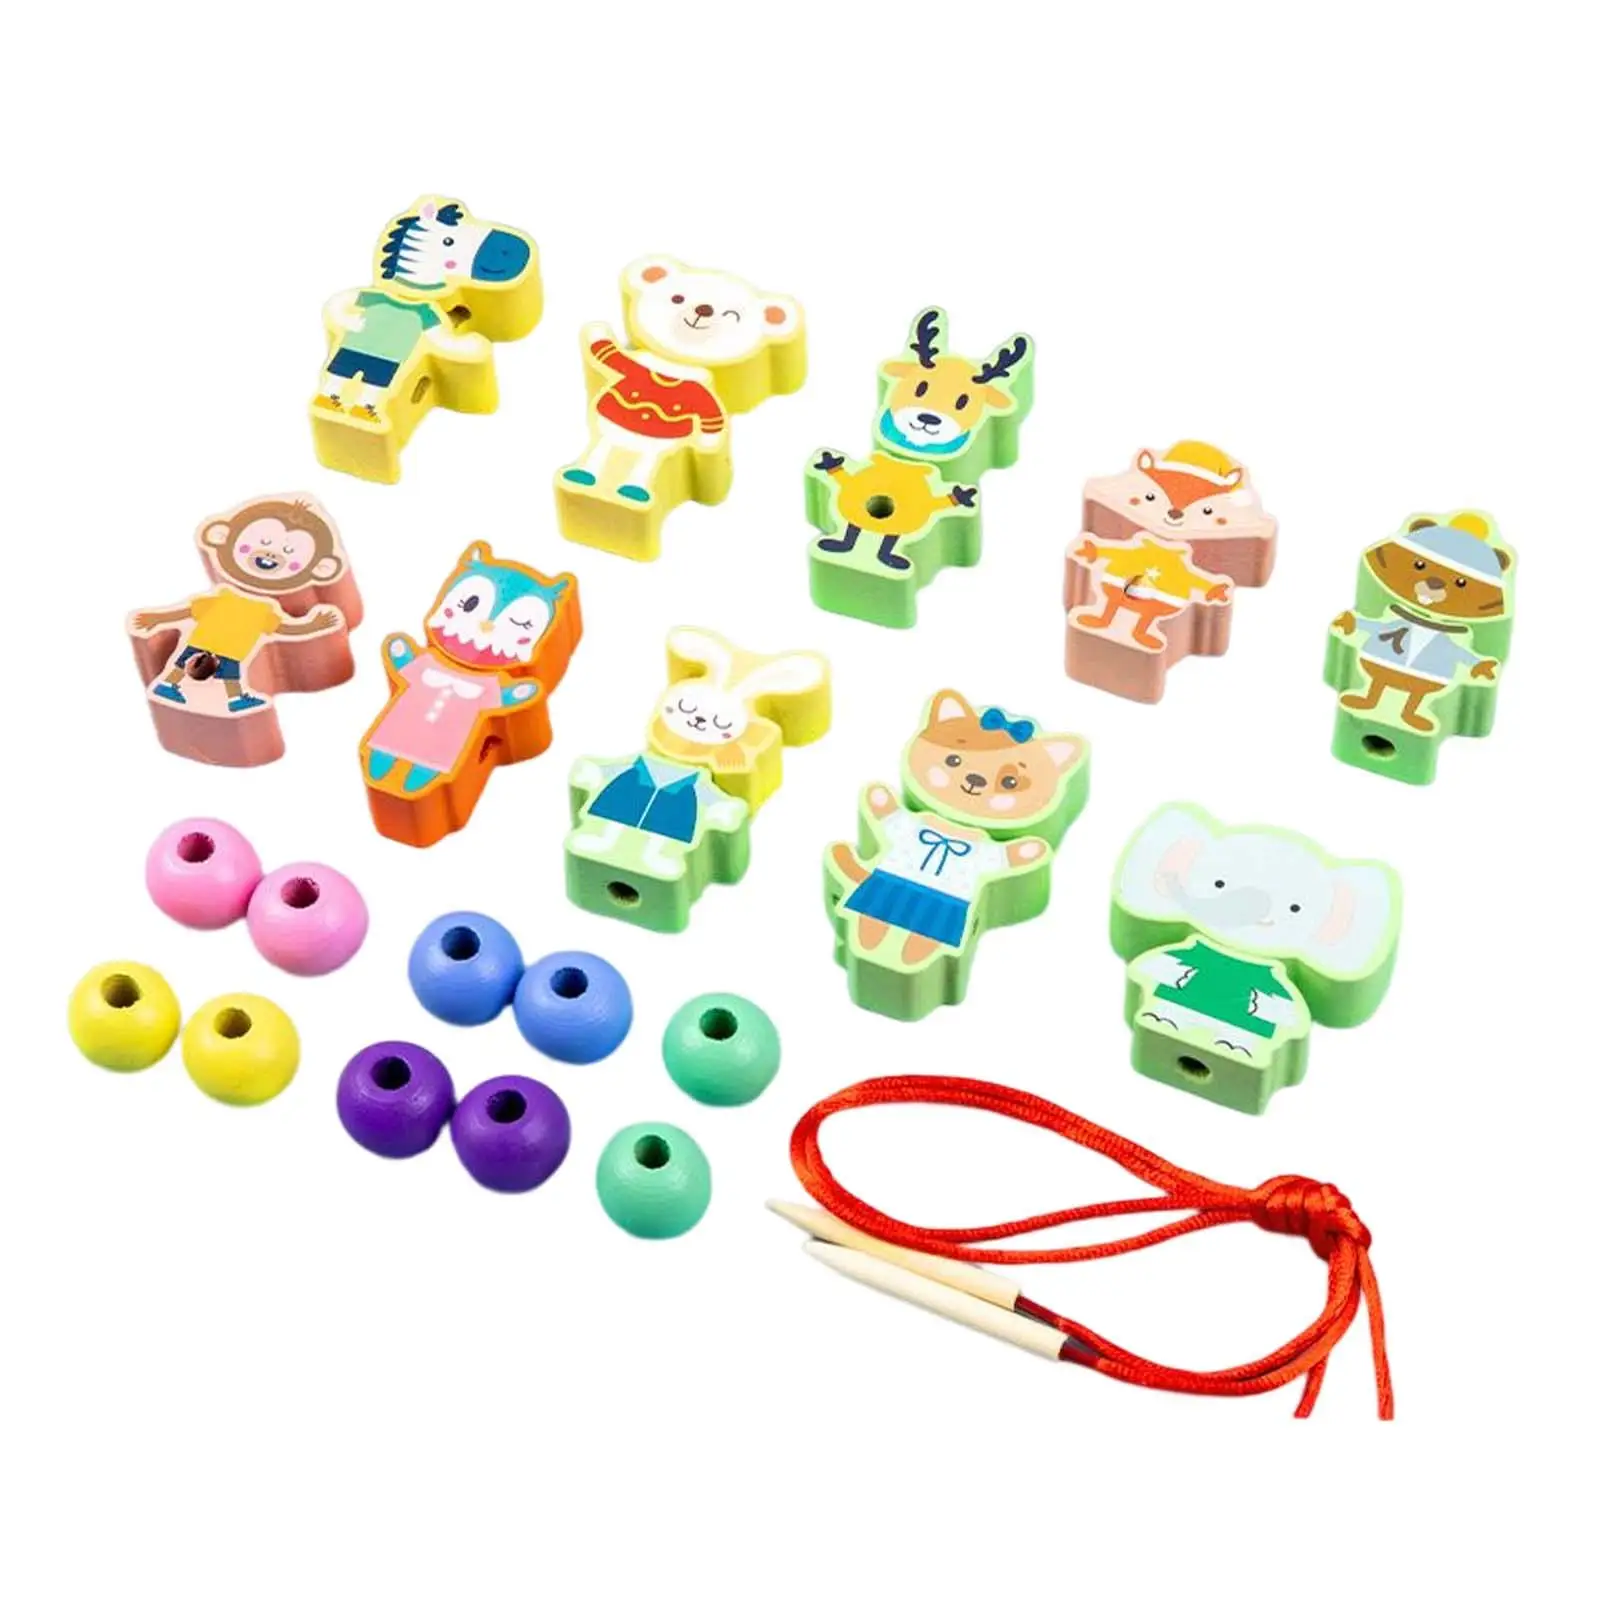 Lacing Beads Set Early Educational Toys Developmental Toy Wooden Crafts Threading Toys Stringing Bead Set for Educational Gifts